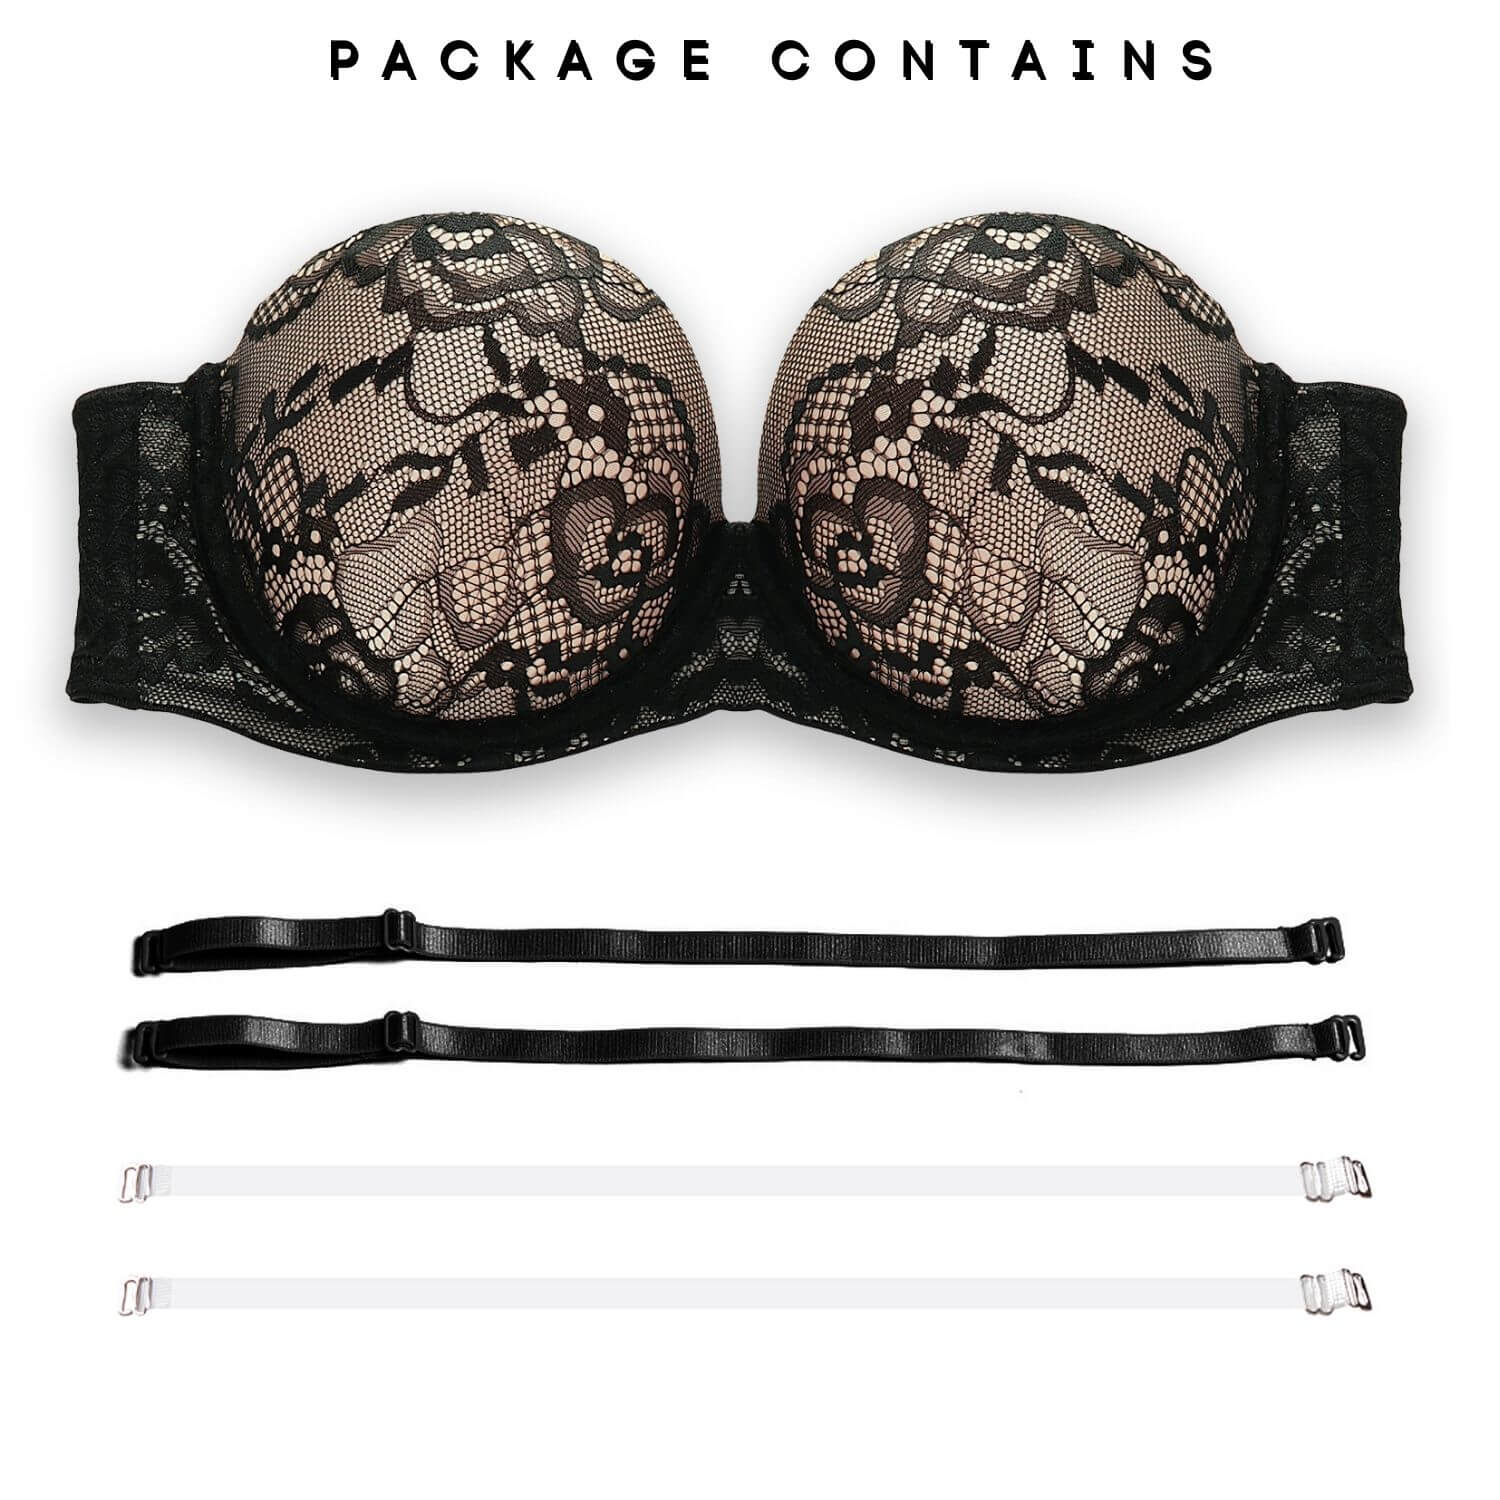 Strapless lift up lace bra package contains